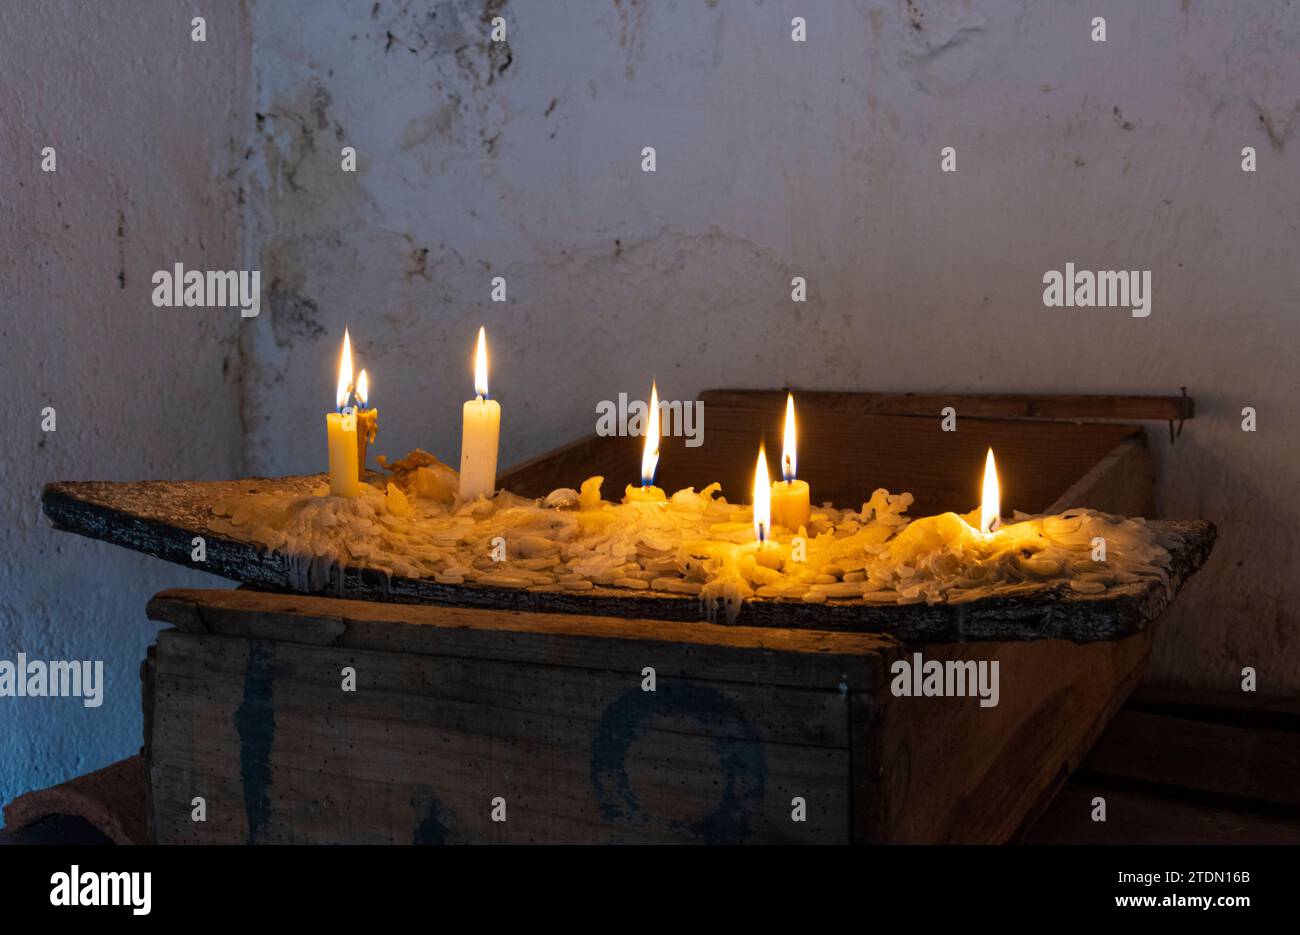 Candles lit on an old piece of wood. Chirche traditions day. Old wooden box. warm atmosphere Stock Photo